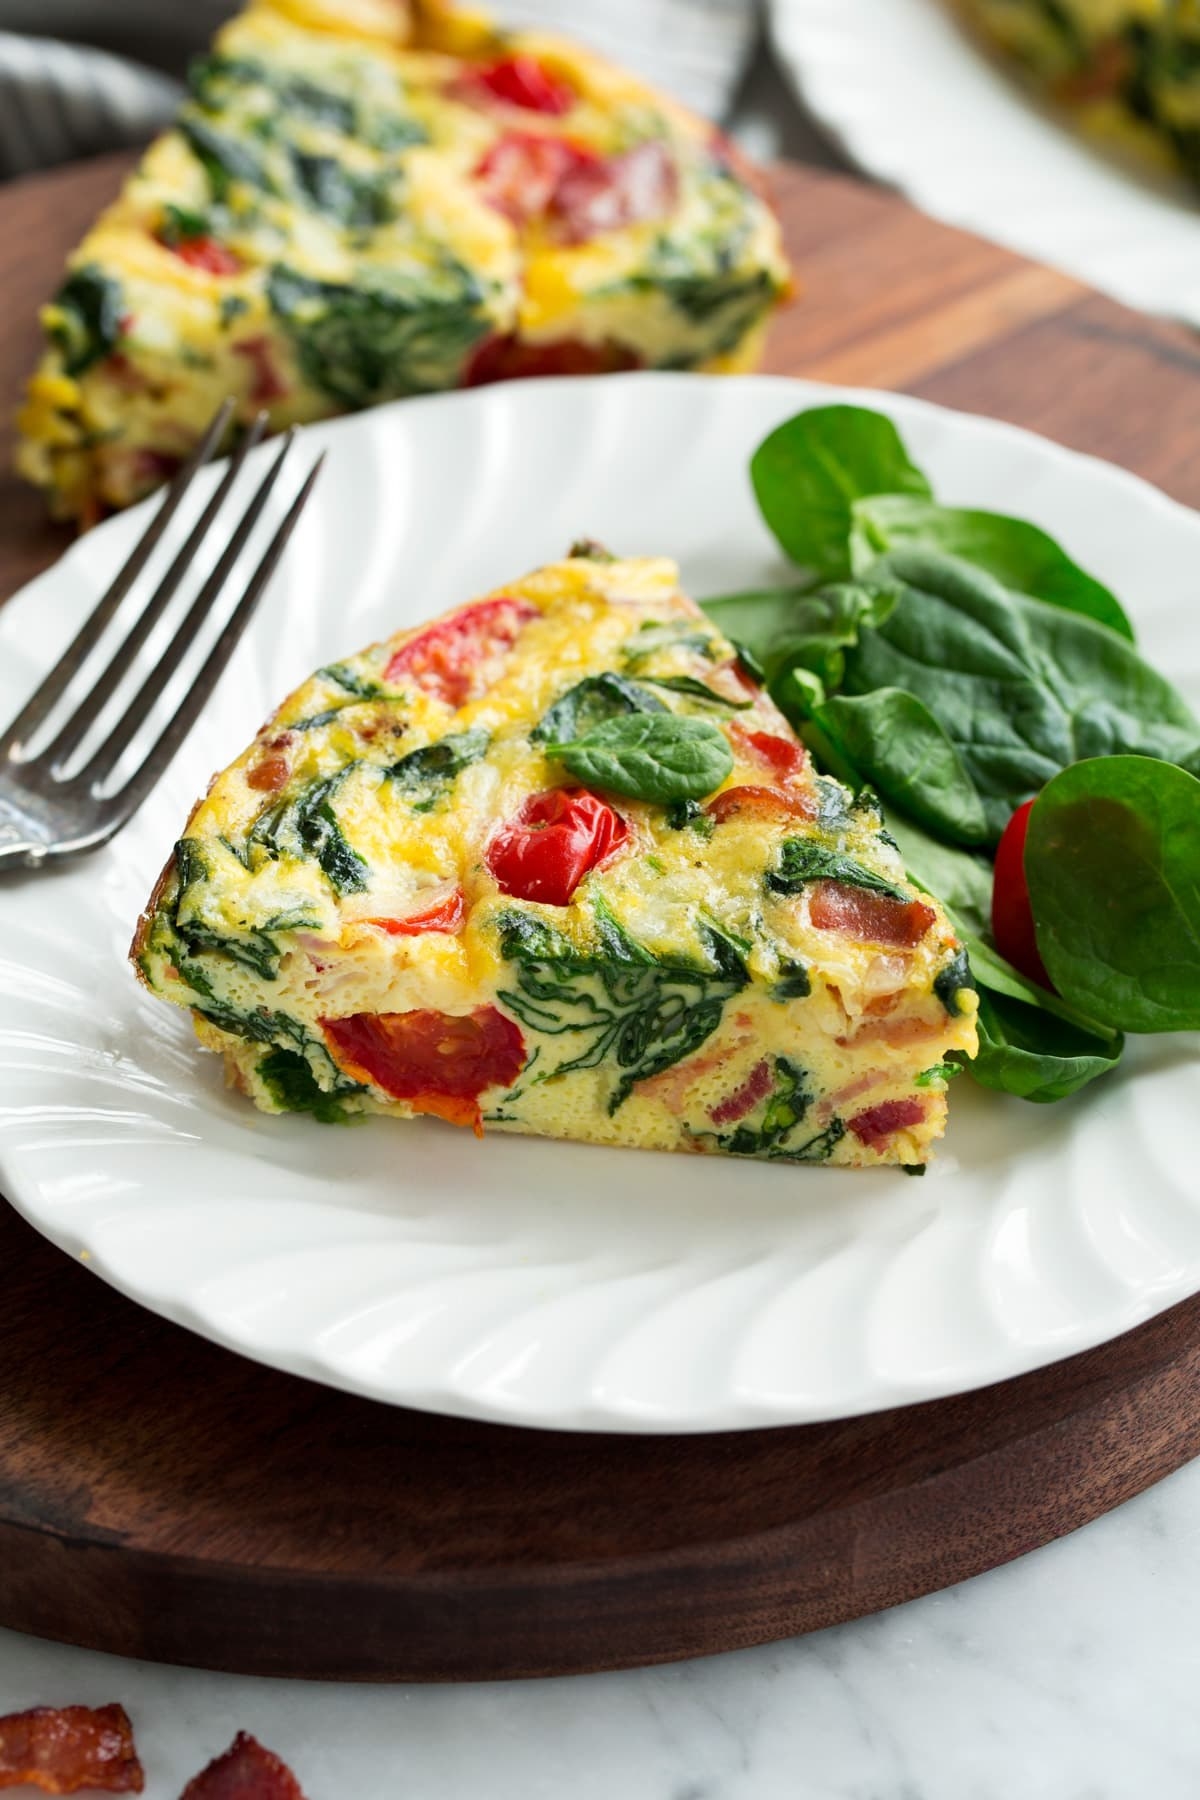 A frittata with spinach, tomato, and bacon.